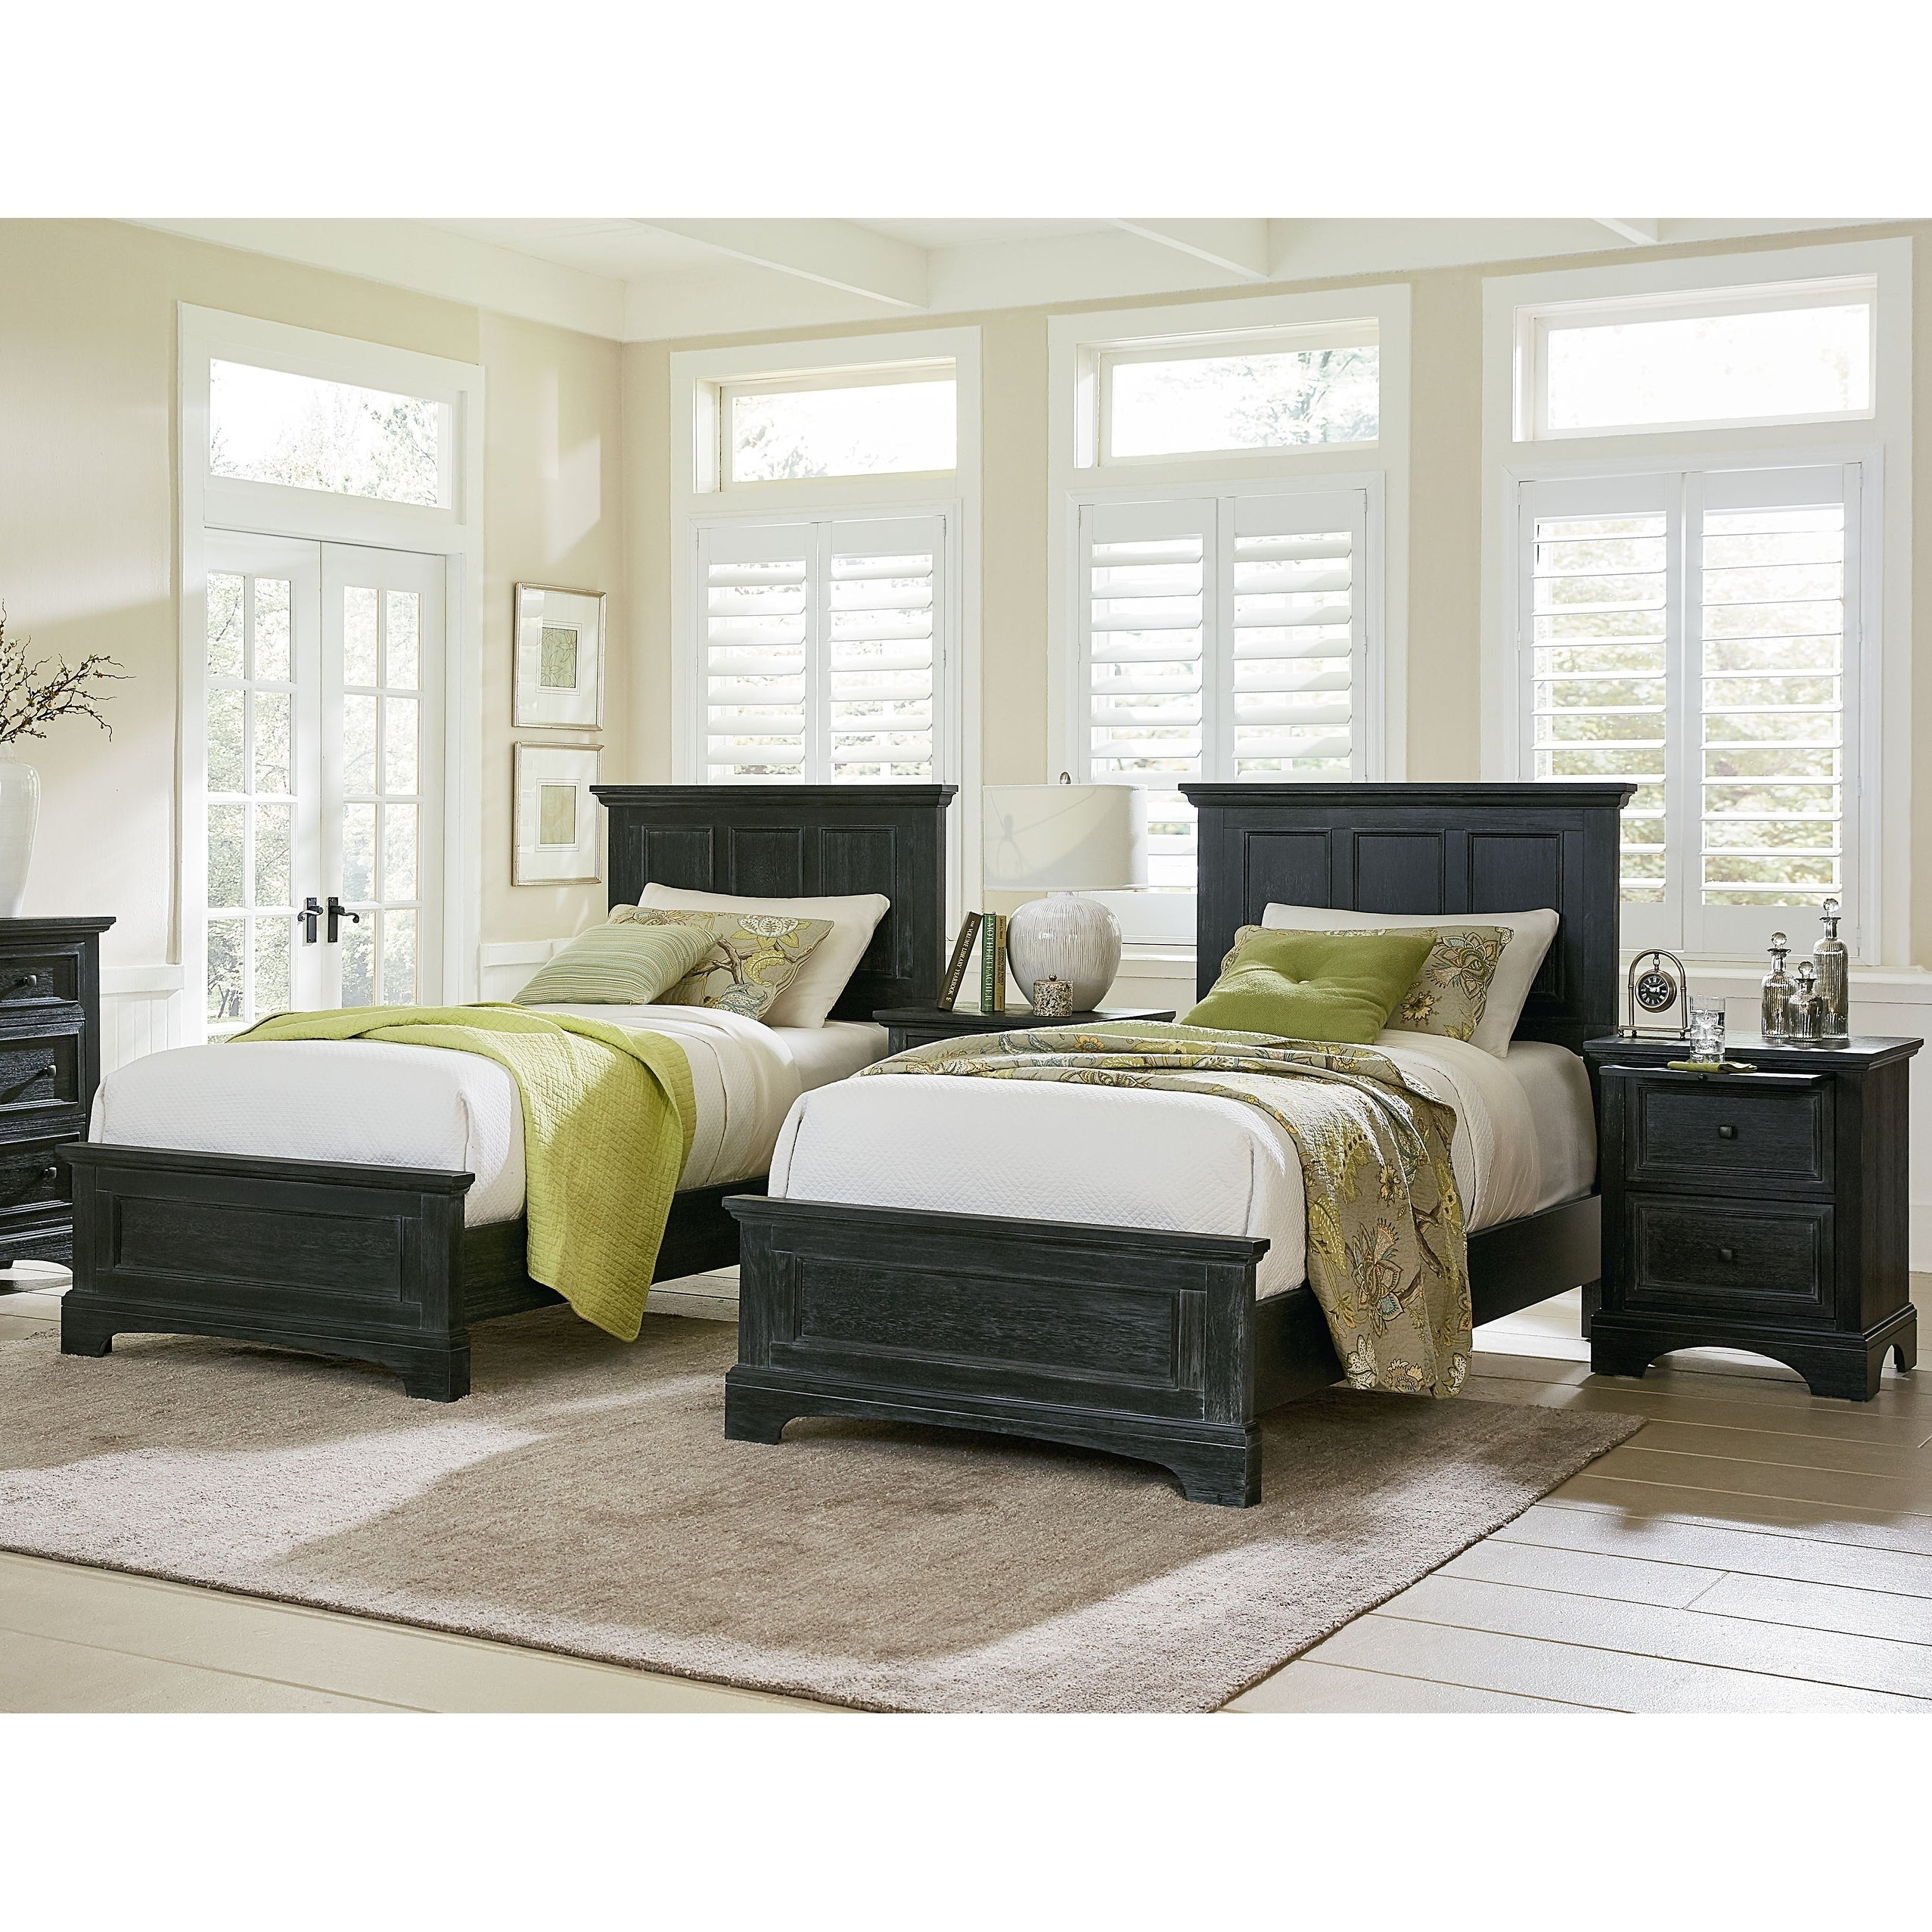 Osp Home Furnishings Farmhouse Basics Double Twin Bedroom Set With 2 Nightstands with regard to size 2554 X 2554